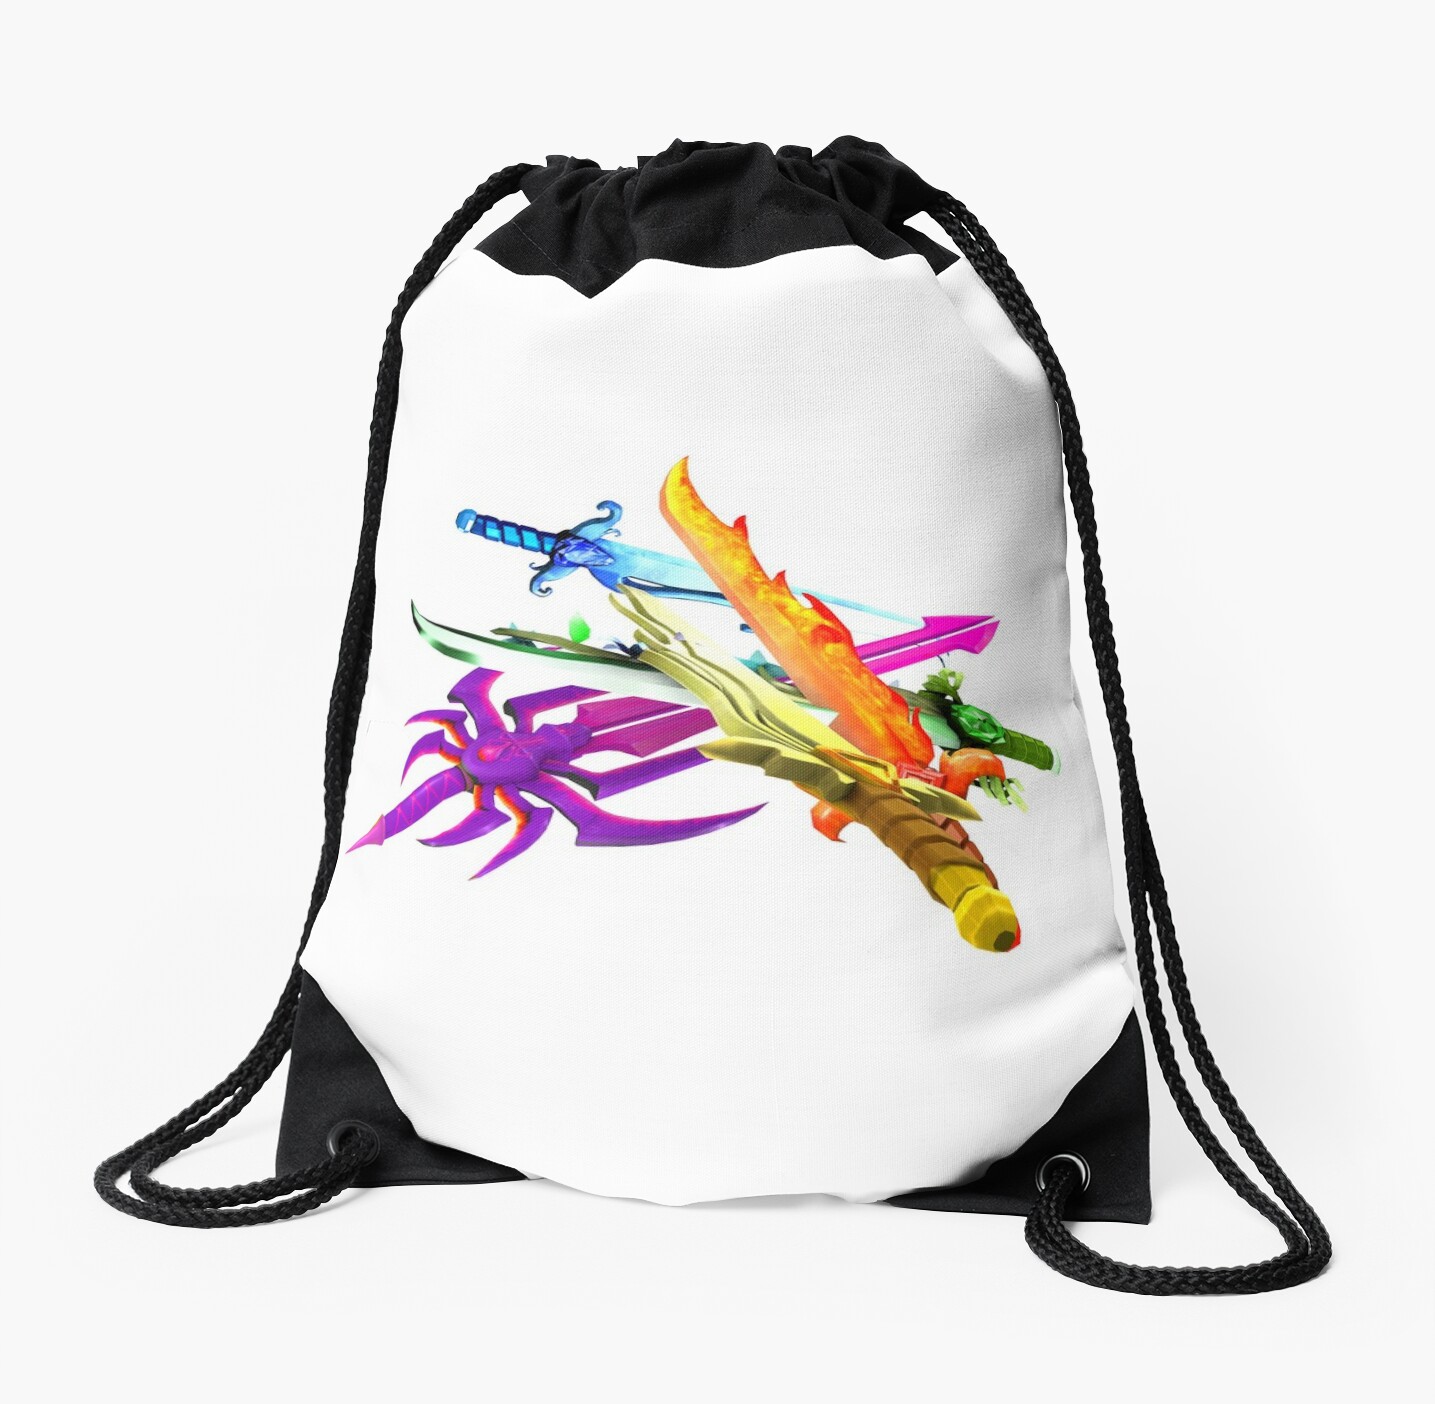 Roblox Sword Pile Drawstring Bag By Neloblivion Redbubble - roblox sword pile laptop sleeve by neloblivion redbubble